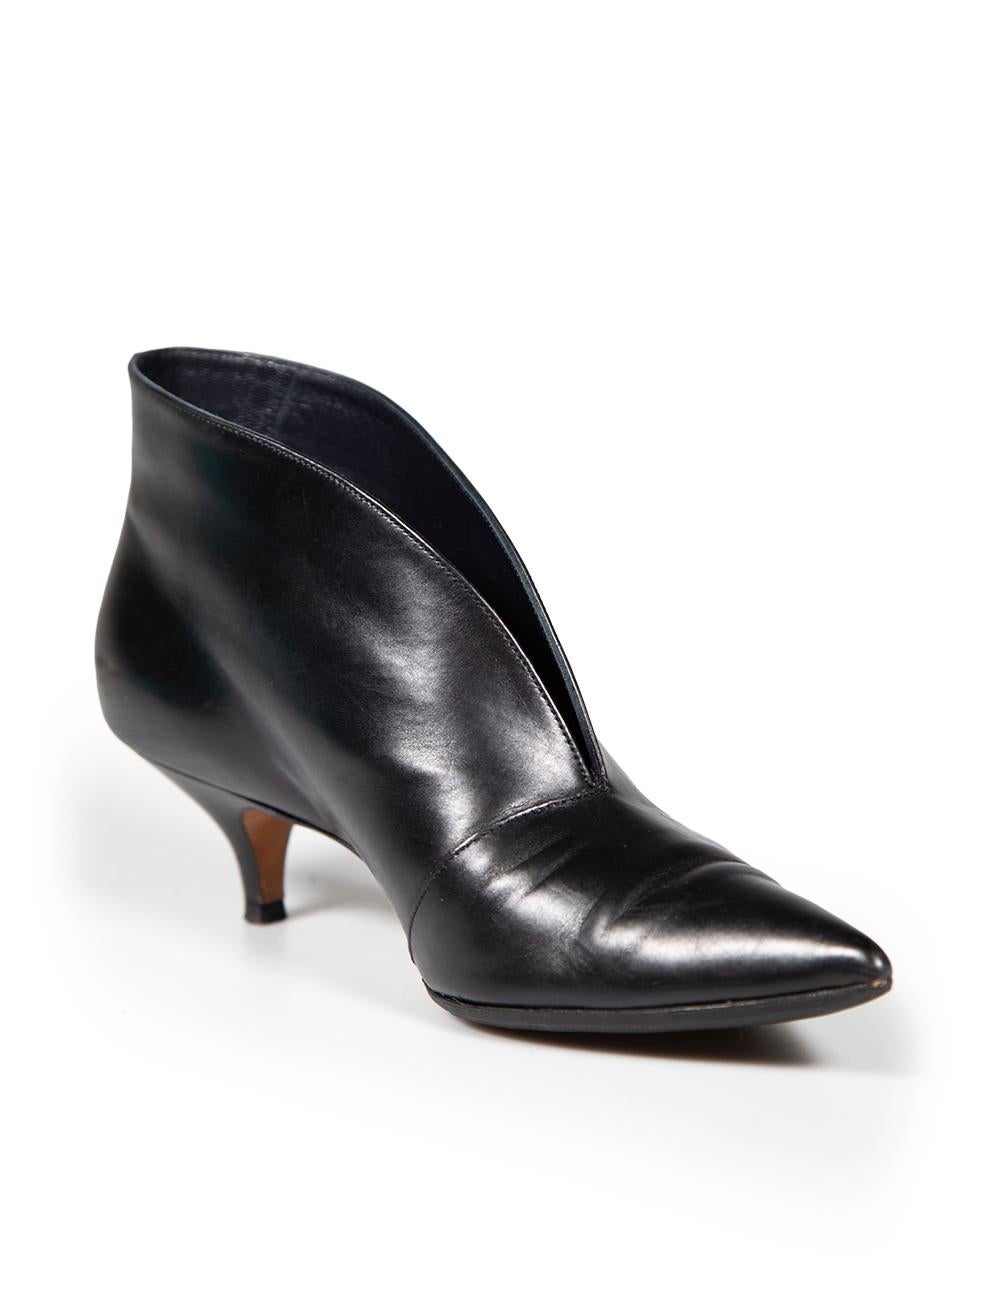 CONDITION is Very good. Minimal wear to heels is evident. These heels have been re-soled, there are scratches to the leather of the inside heel and pointed toe tip on this used Céline designer resale item. These shoes have been resoled.
 
 
 
